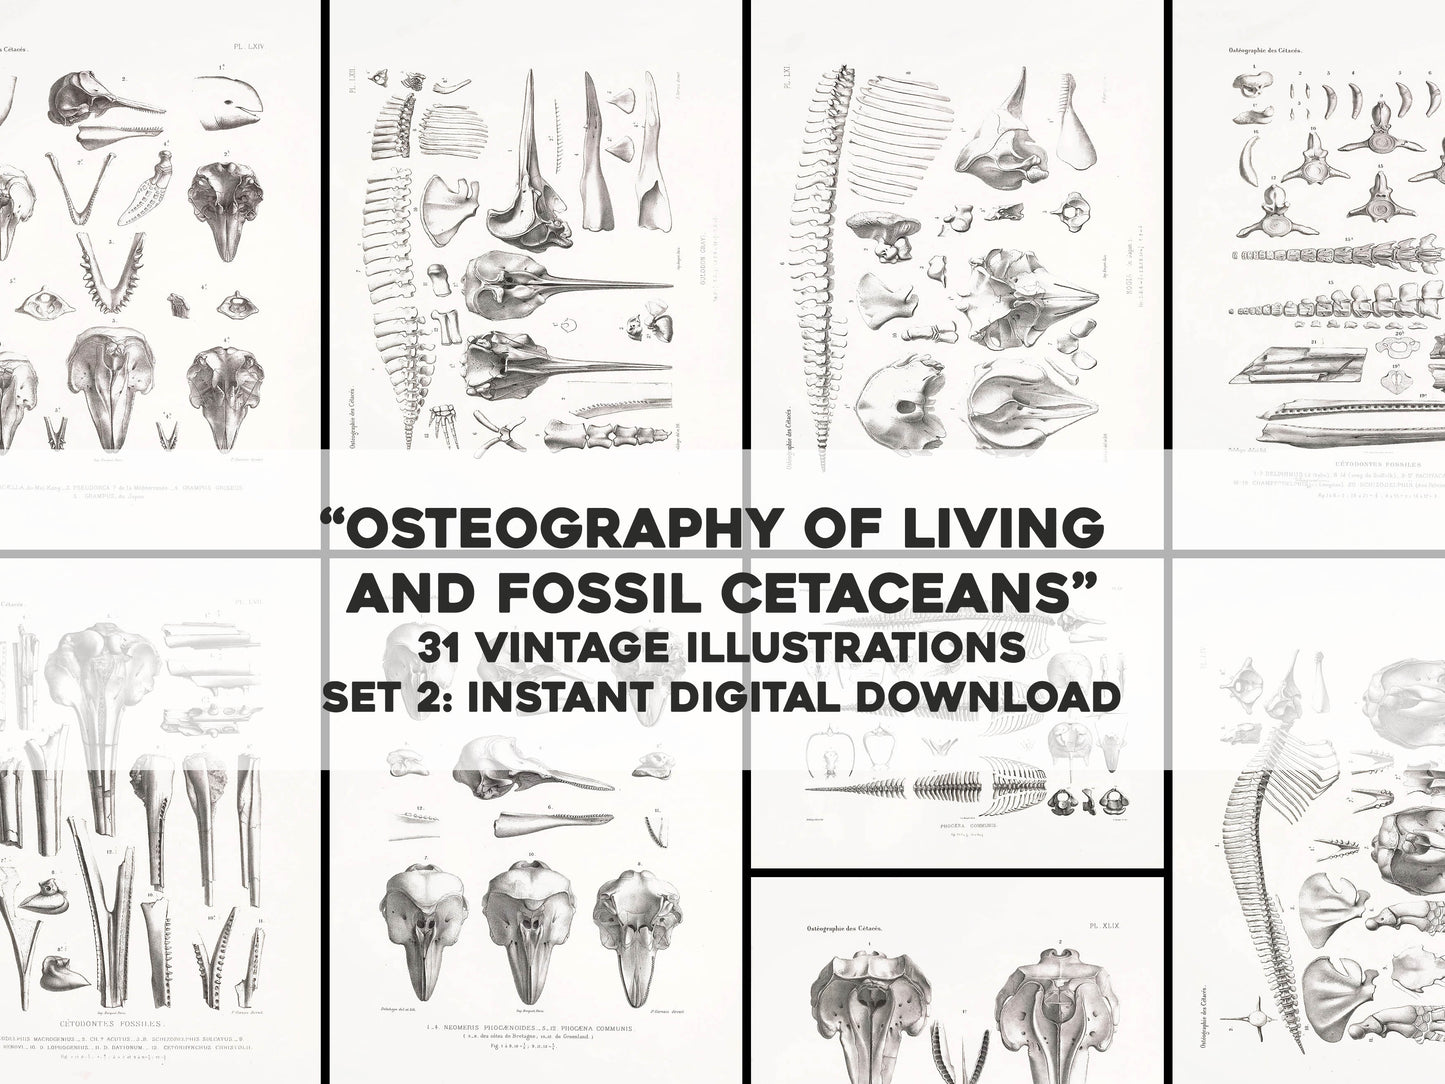 Osteography of Living and Fossil Cetaceans Set 2 [31 Images]